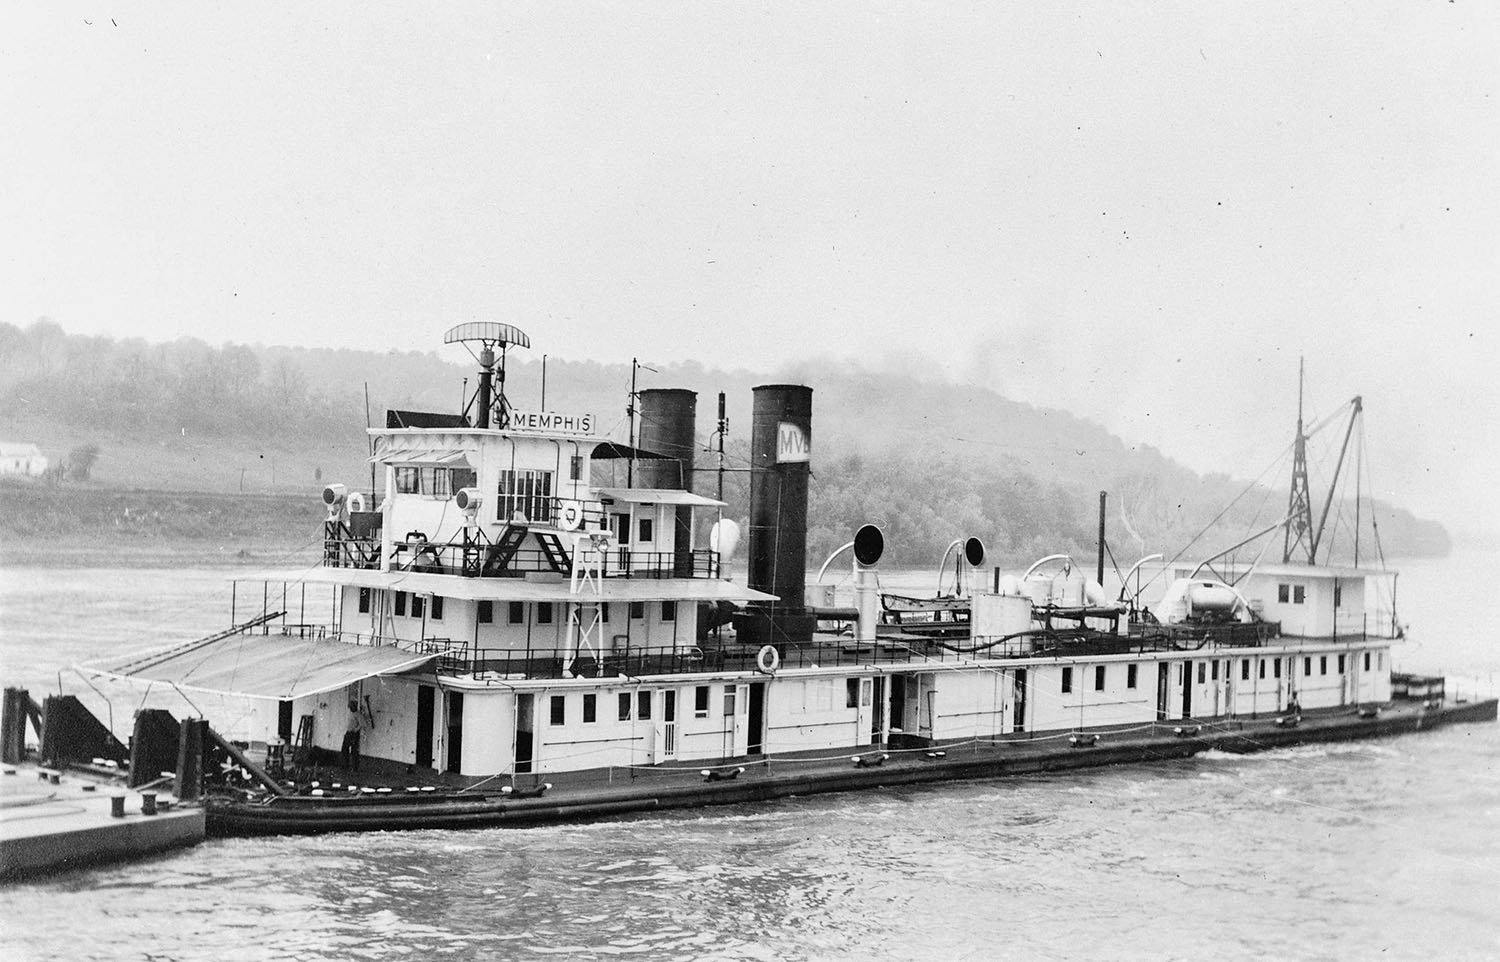 The Federal Towboat Memphis Carried A Famous Bell